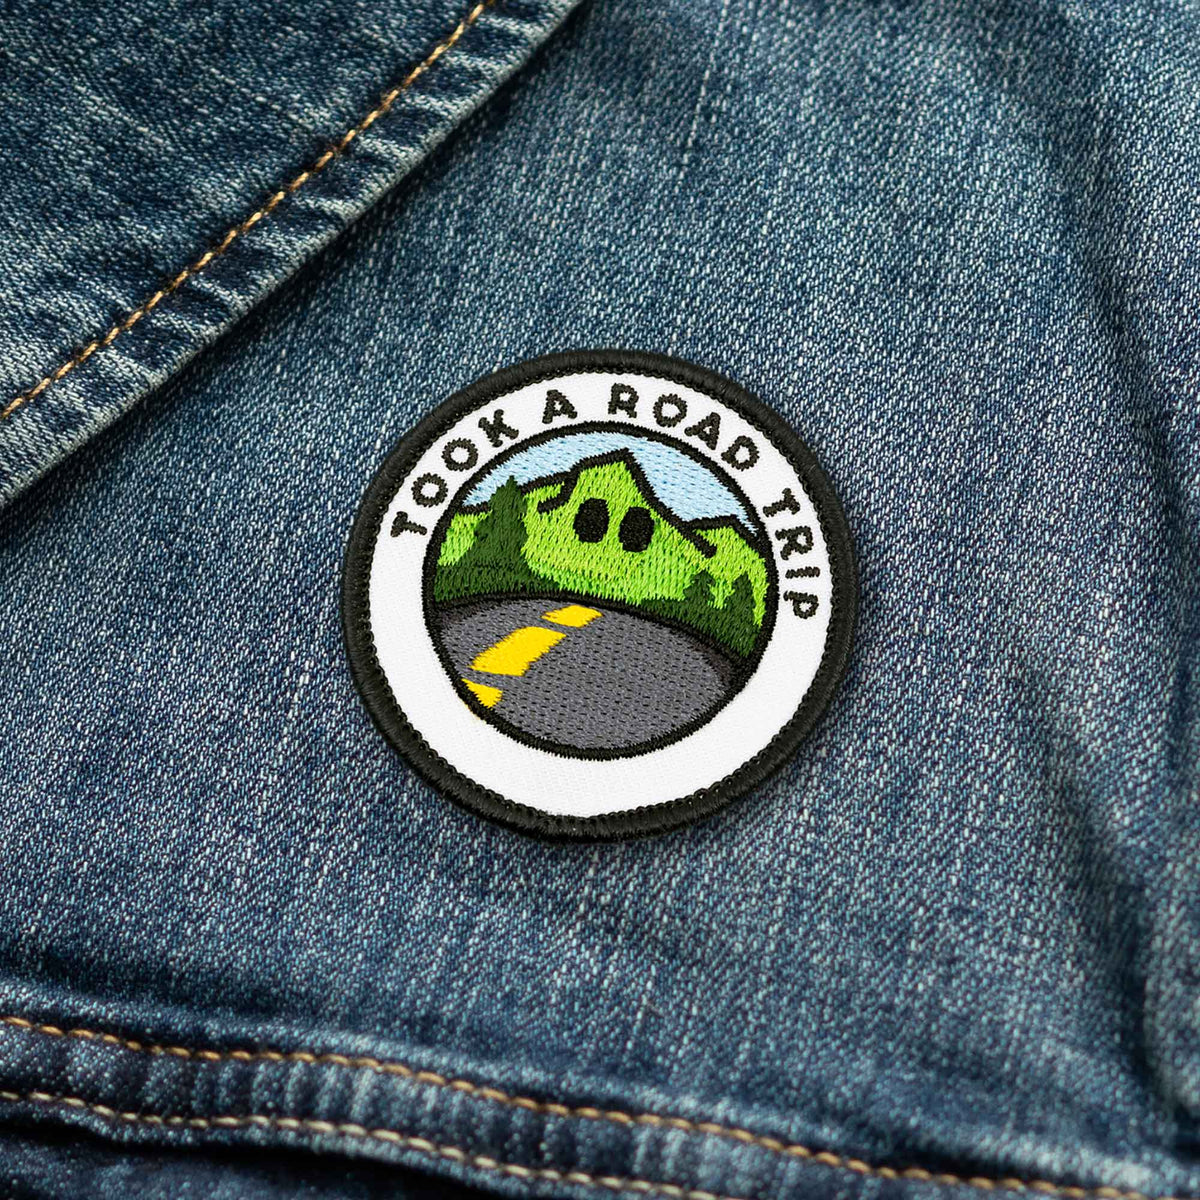 Took A Road Trip individual adulting merit badge patch for adults on denim jacket